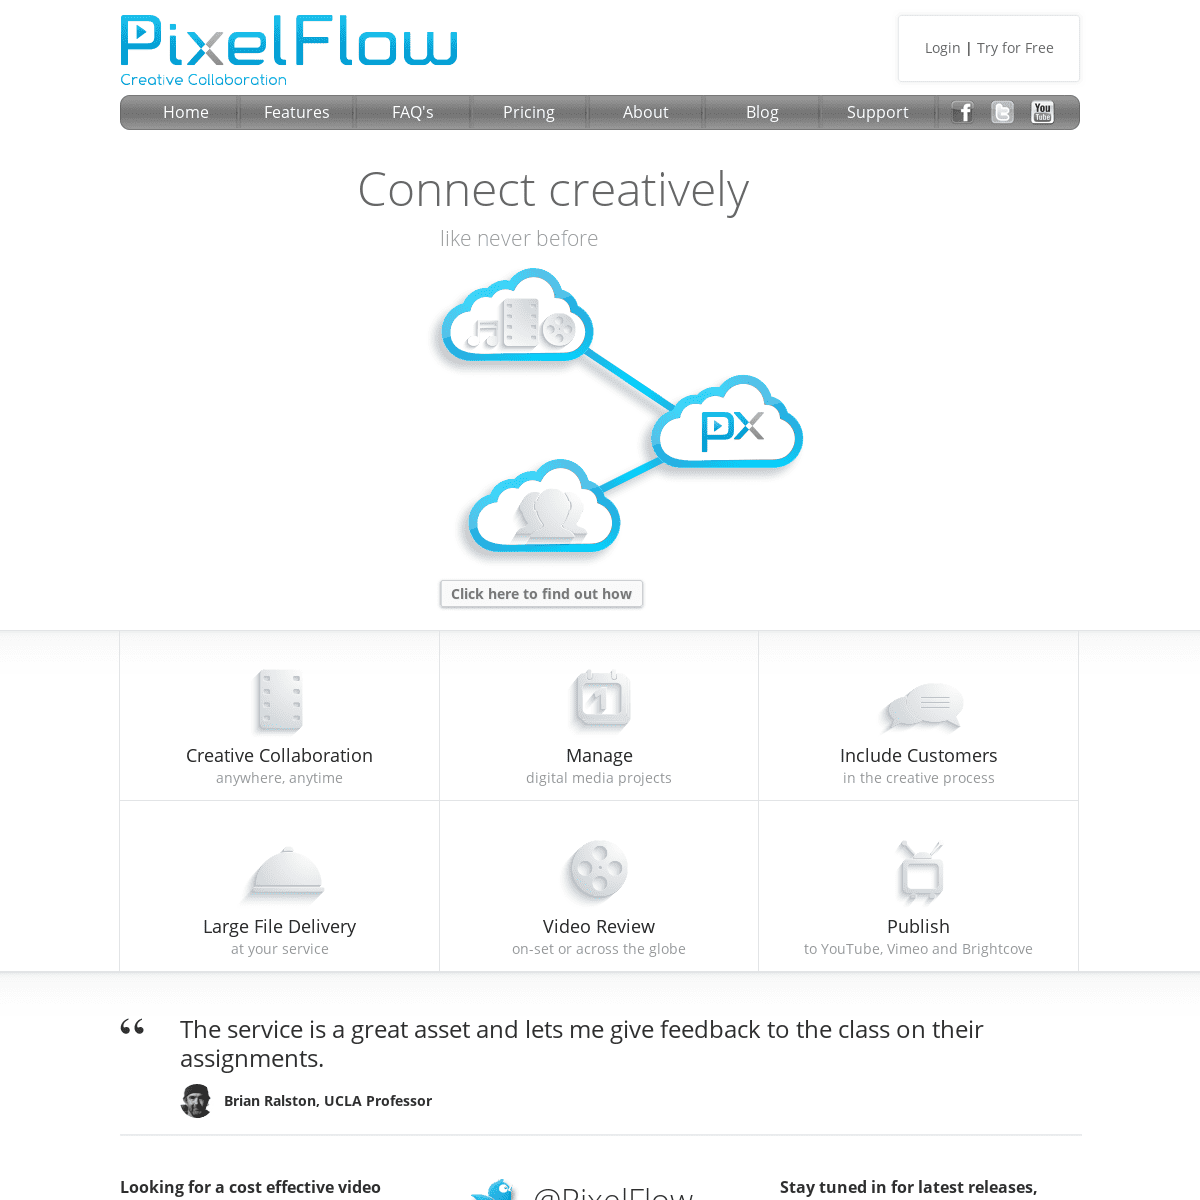 A complete backup of pixelflow.com